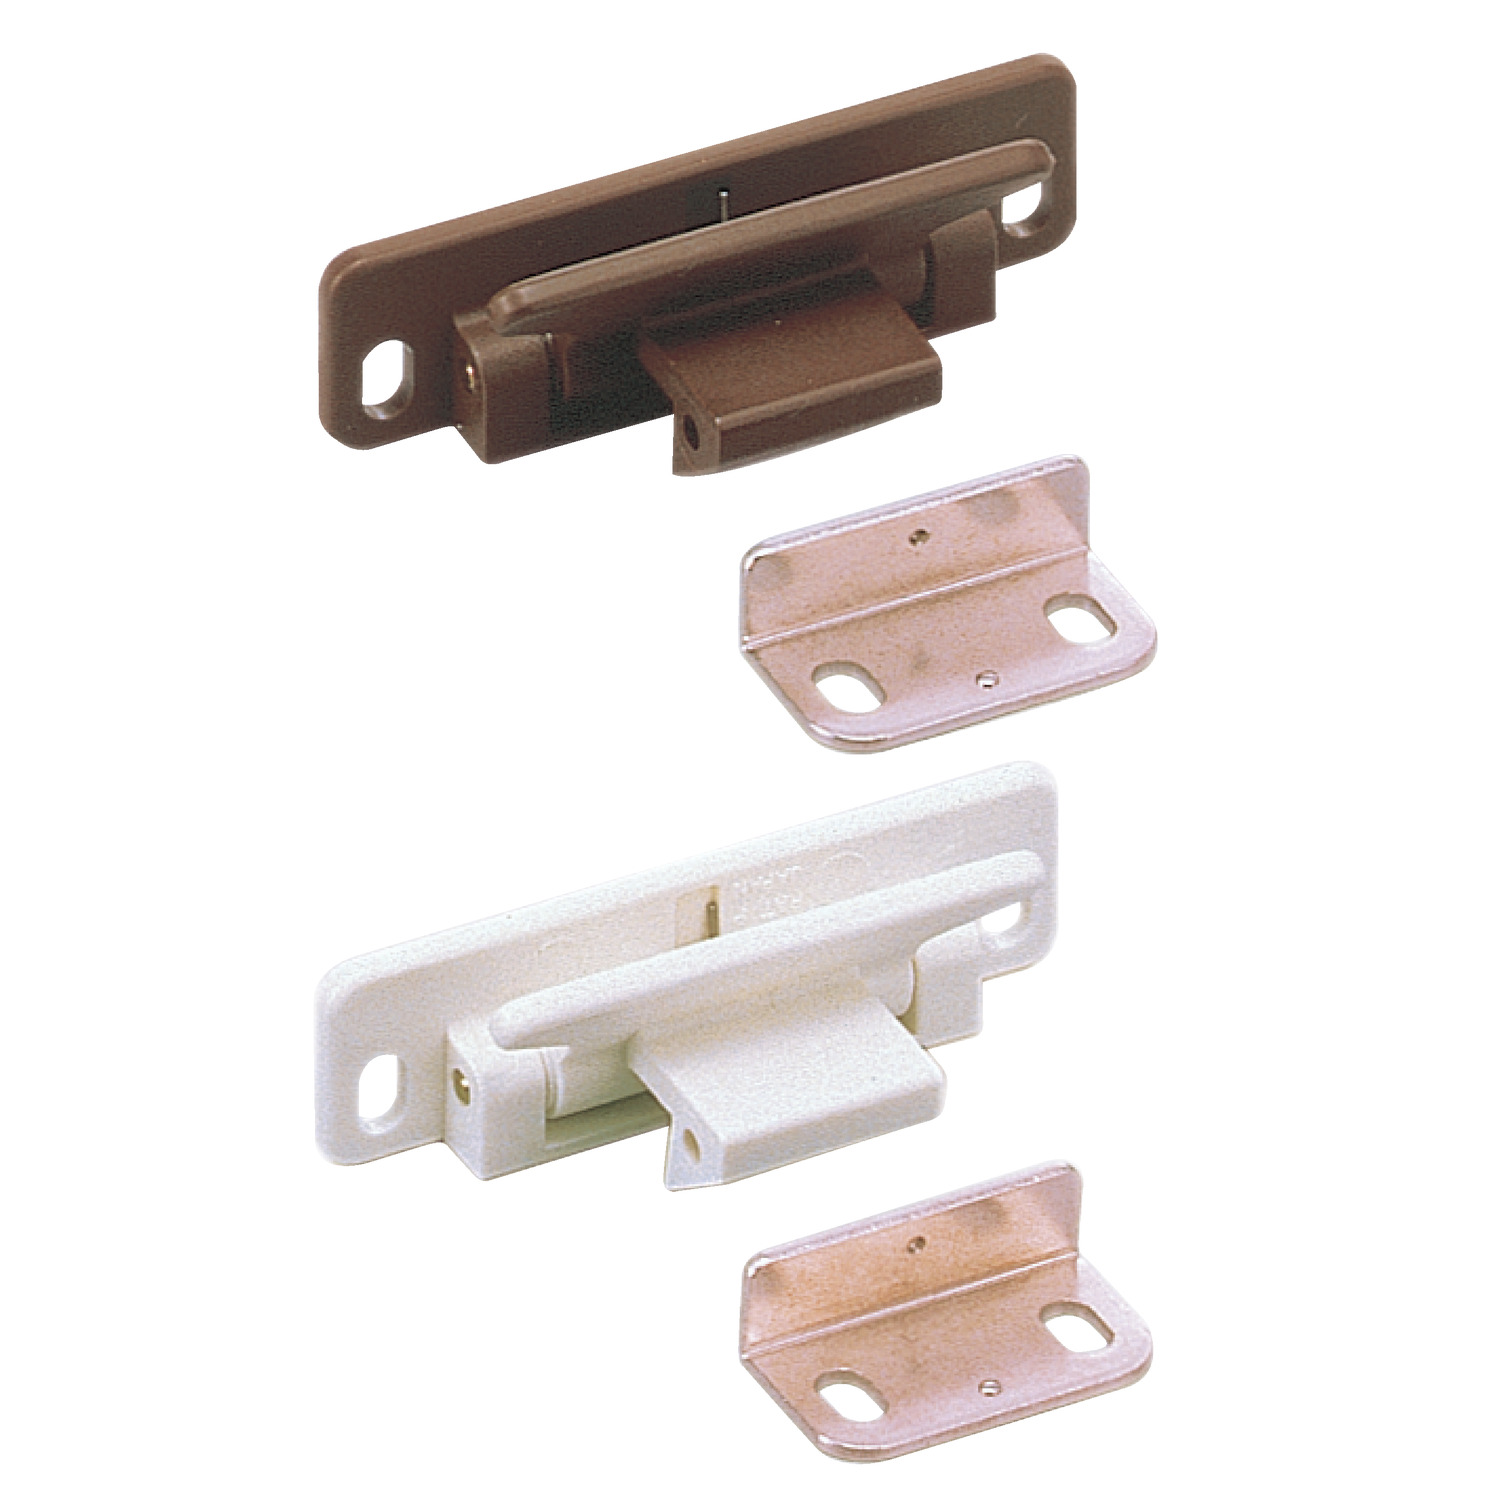 E2001.AC0020 Lever Catches Brown - finger tip control. Supplied in multiples of 5